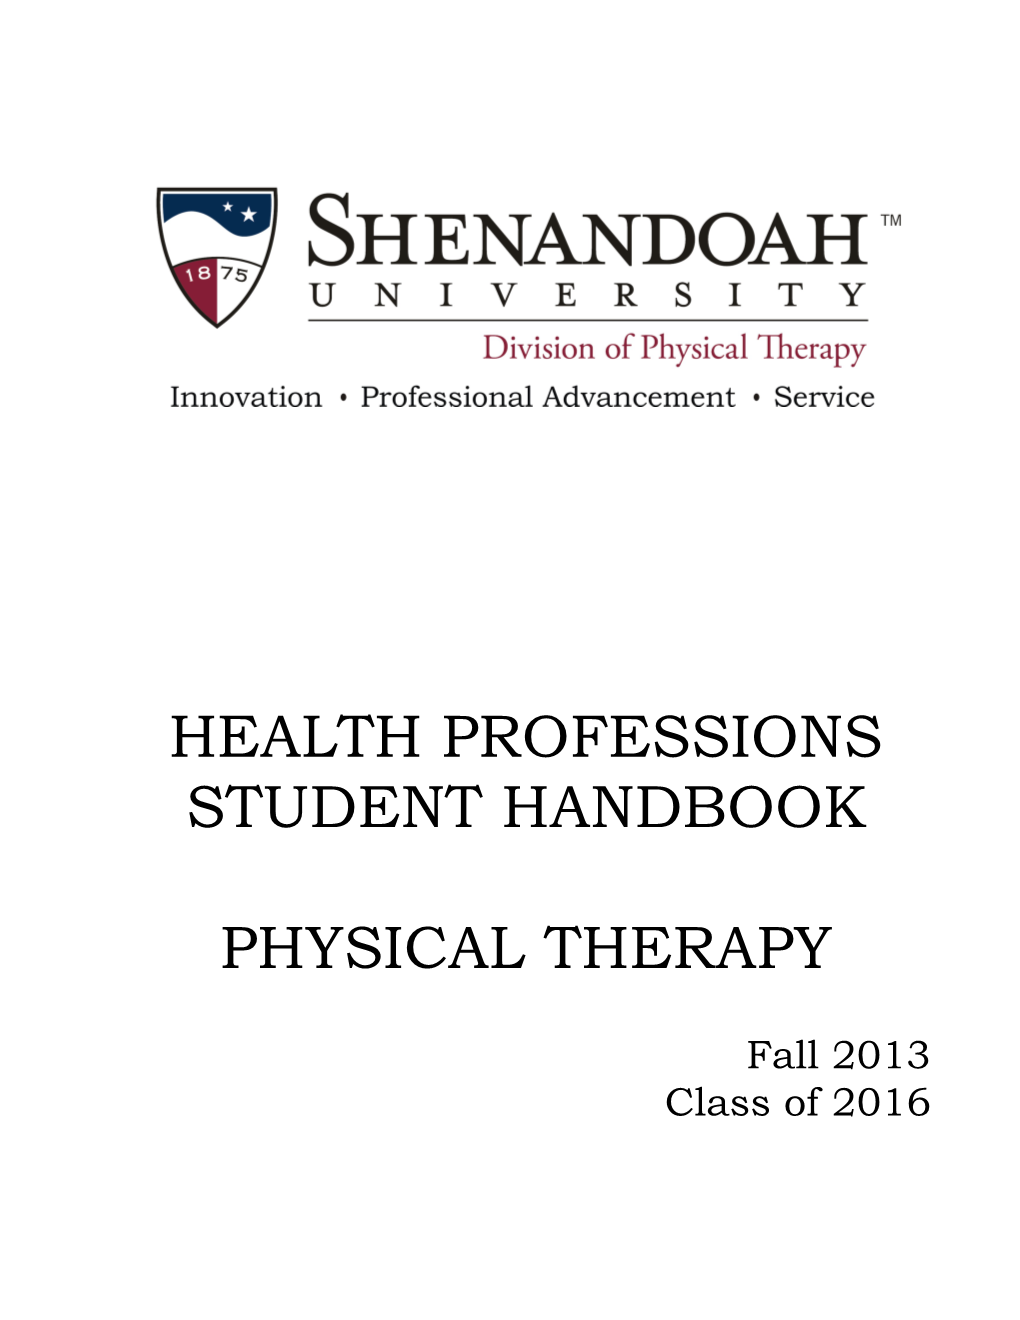 Health Professions Student Handbook Physical Therapy